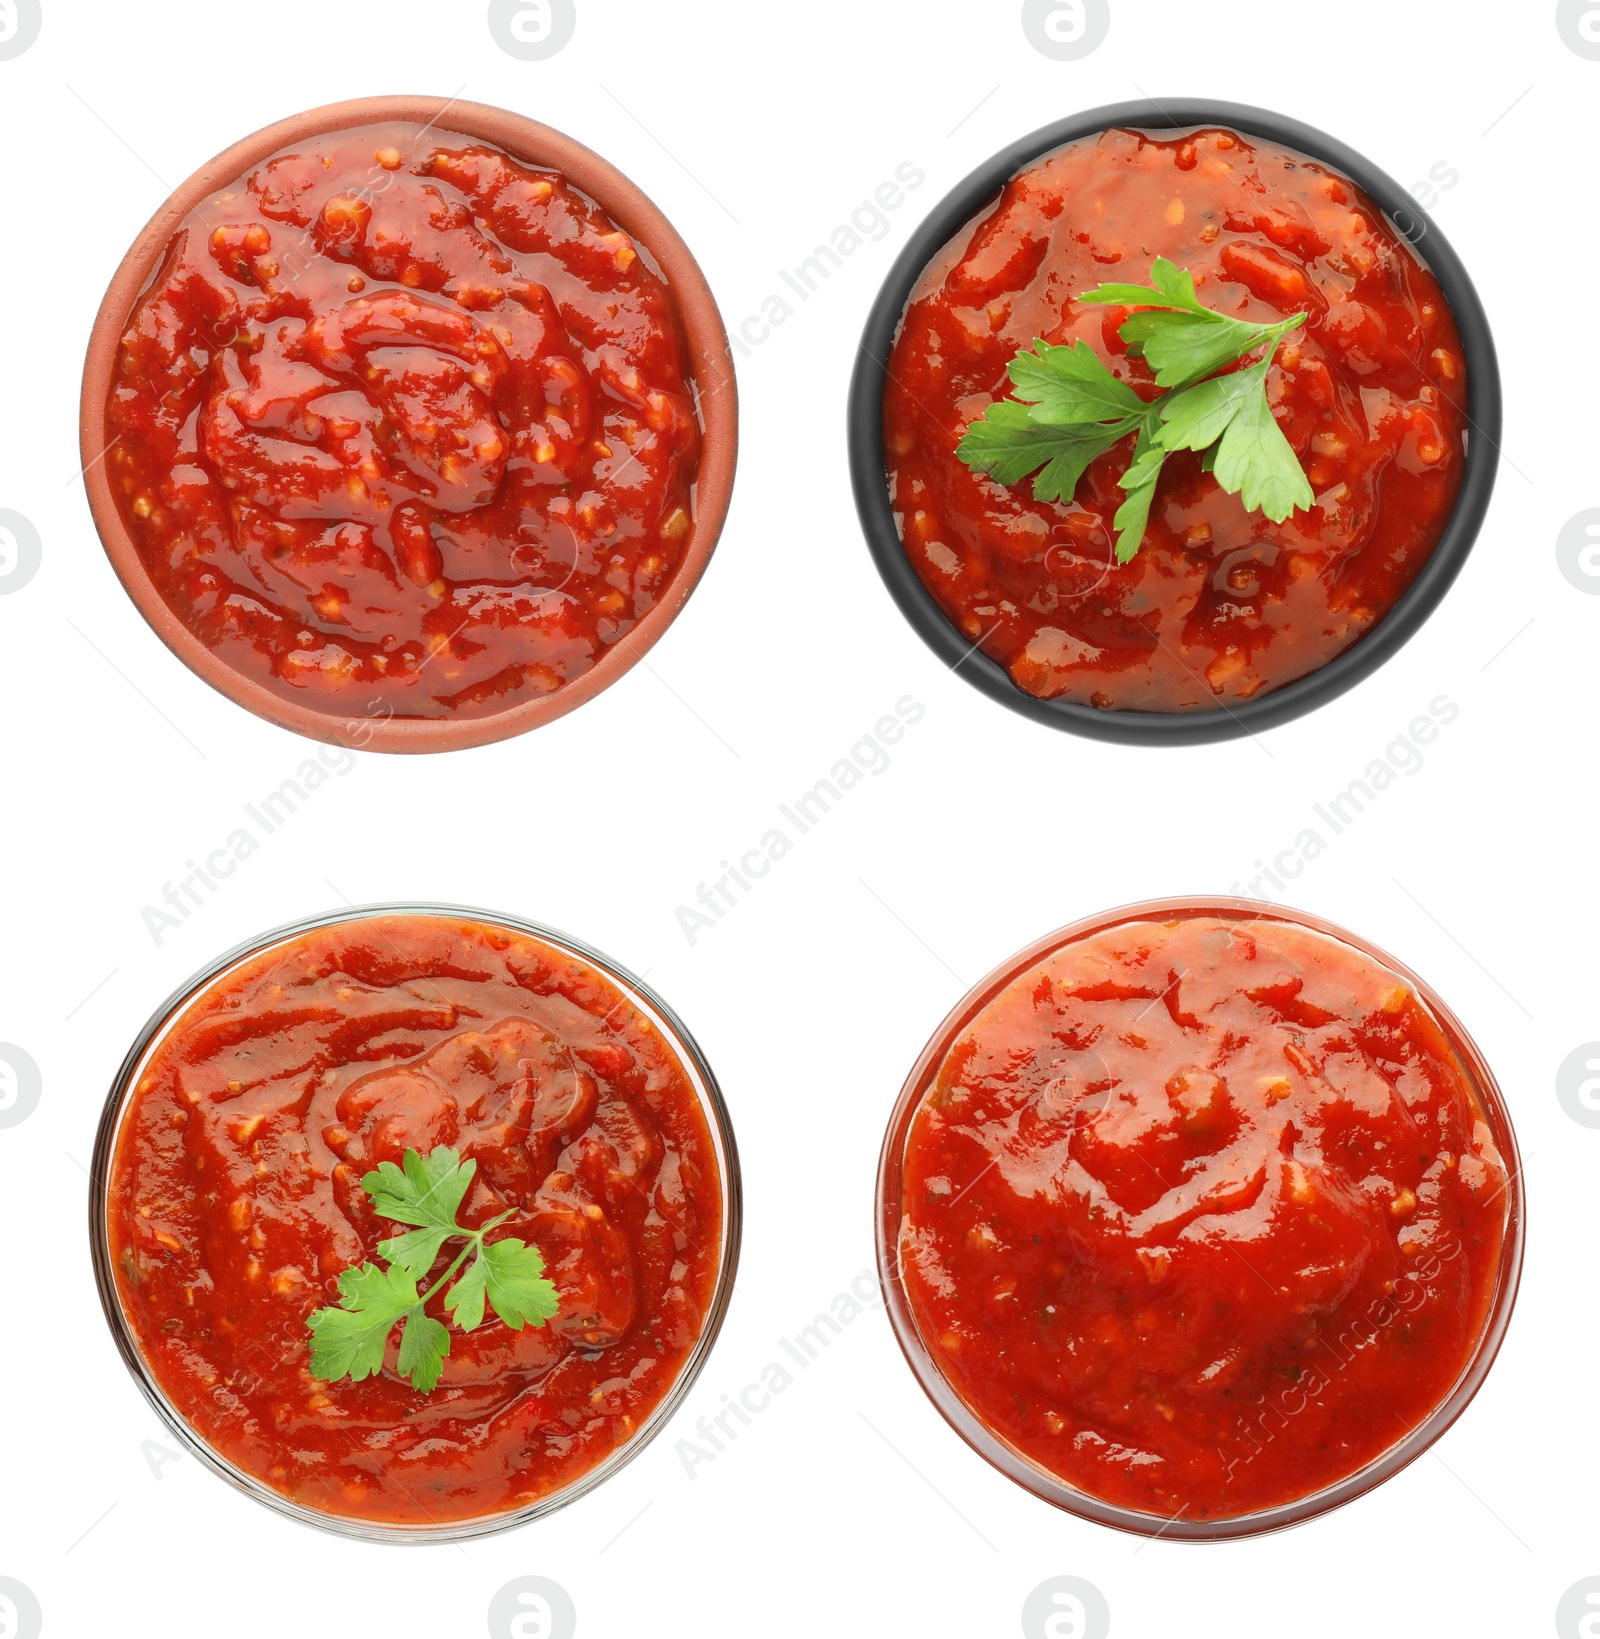 Image of Set with adjika sauce on white background, top view